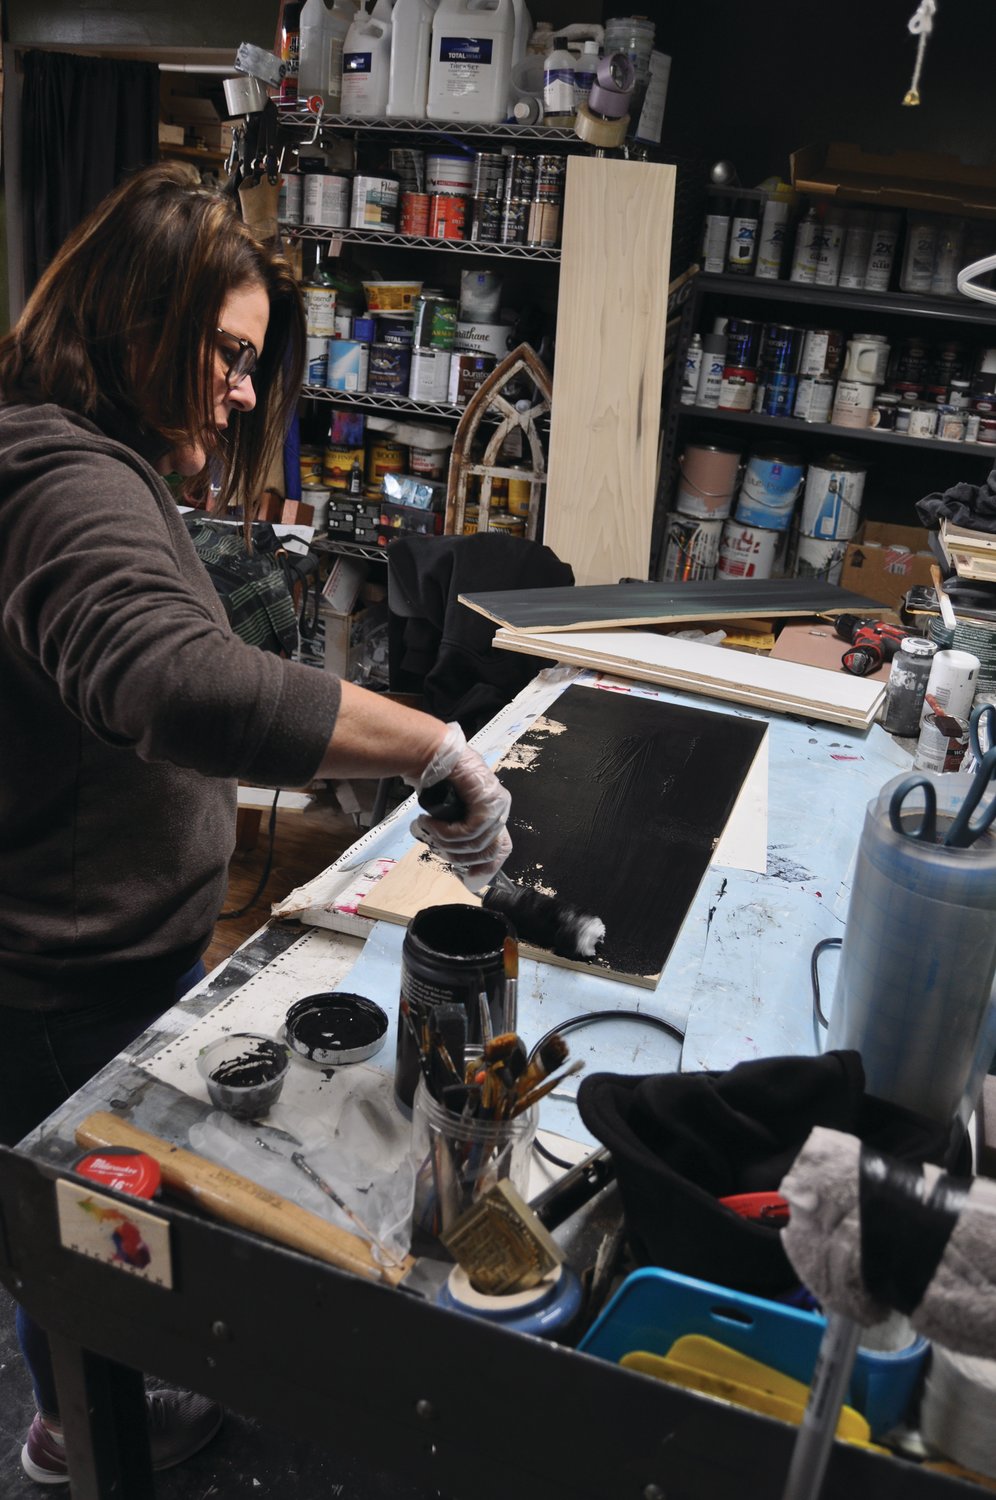 Jami Harrington, owner of Reclaimed by Grace, paints a board at the shop Tuesday. Fusion 54 is seeking funding for an entrepreneur program and small business development and support.